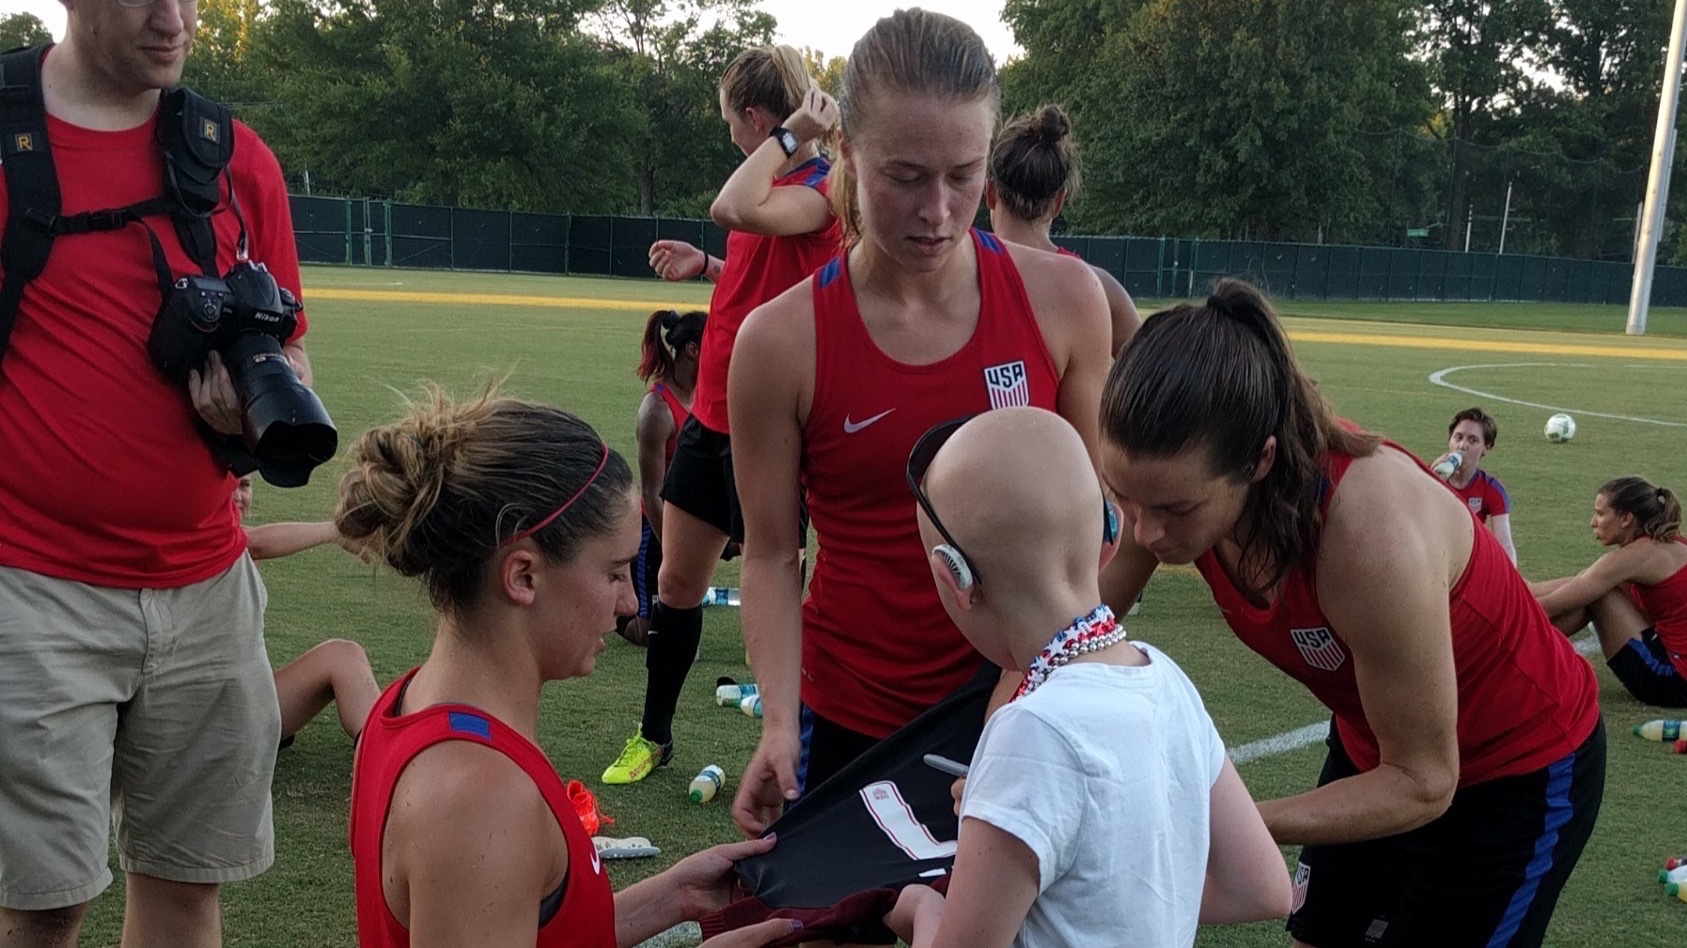 Kodi Tutt collects autographs from the U.S. Women's National Team